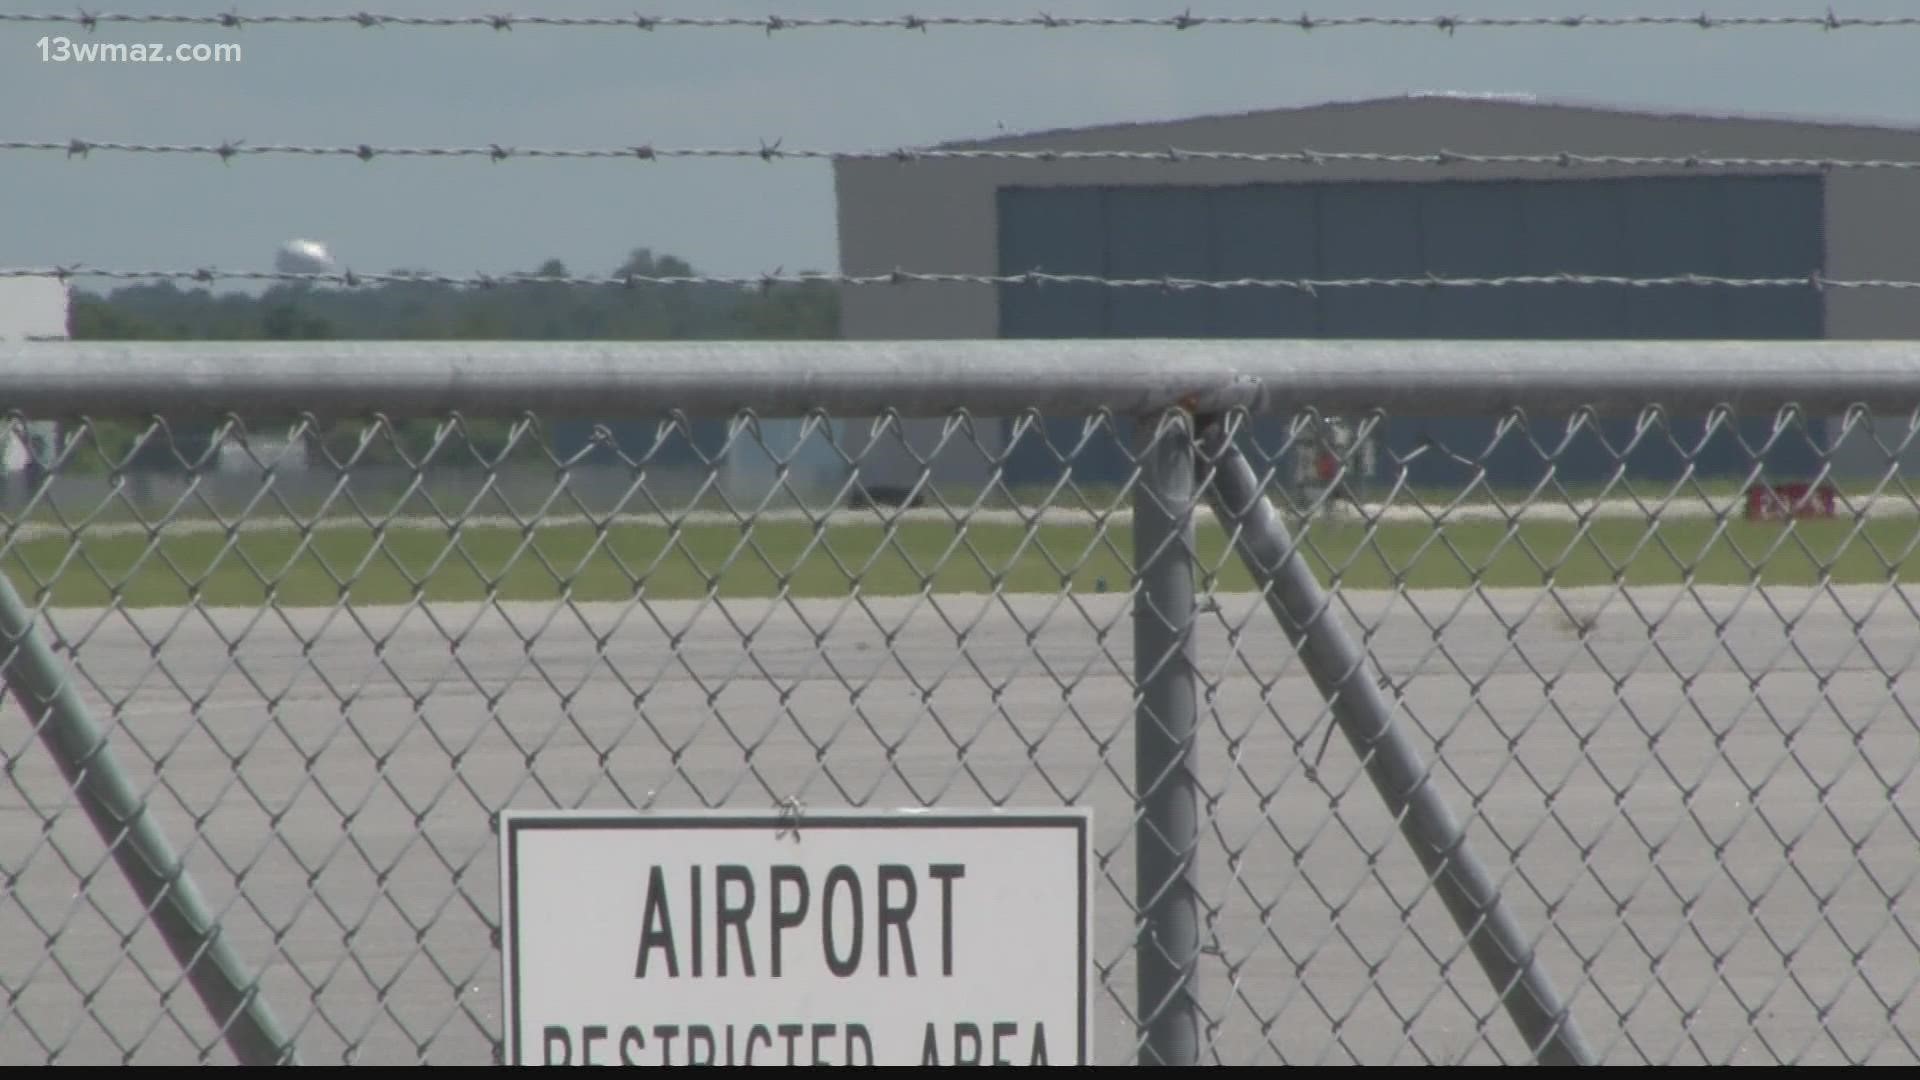 A federal grant is paving the way for a runway expansion that could mean a boost for airport business.